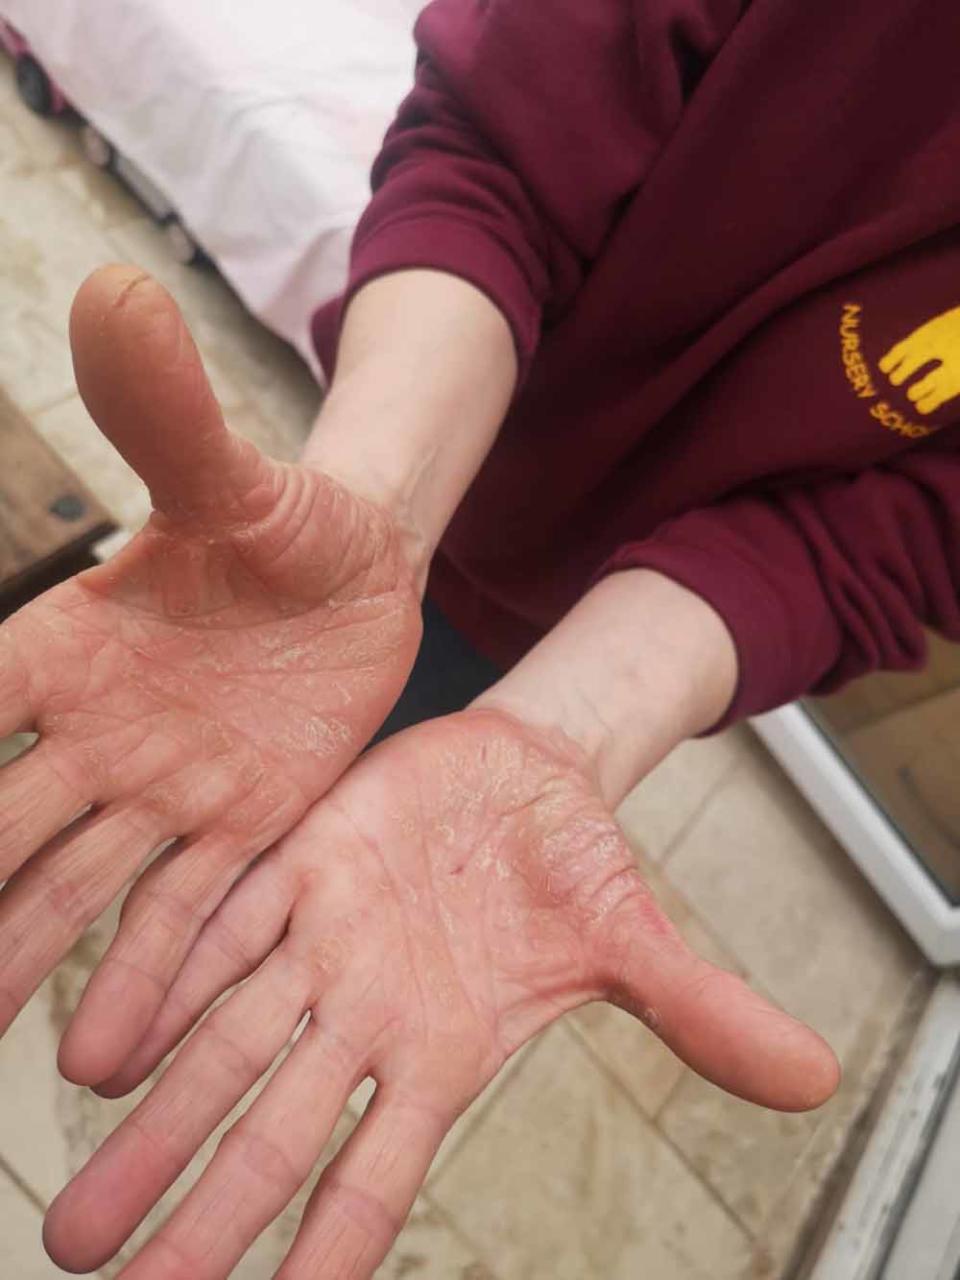 The mum was prescribed various treatments for her hands but to no avail. (Collect/PA Real Life)